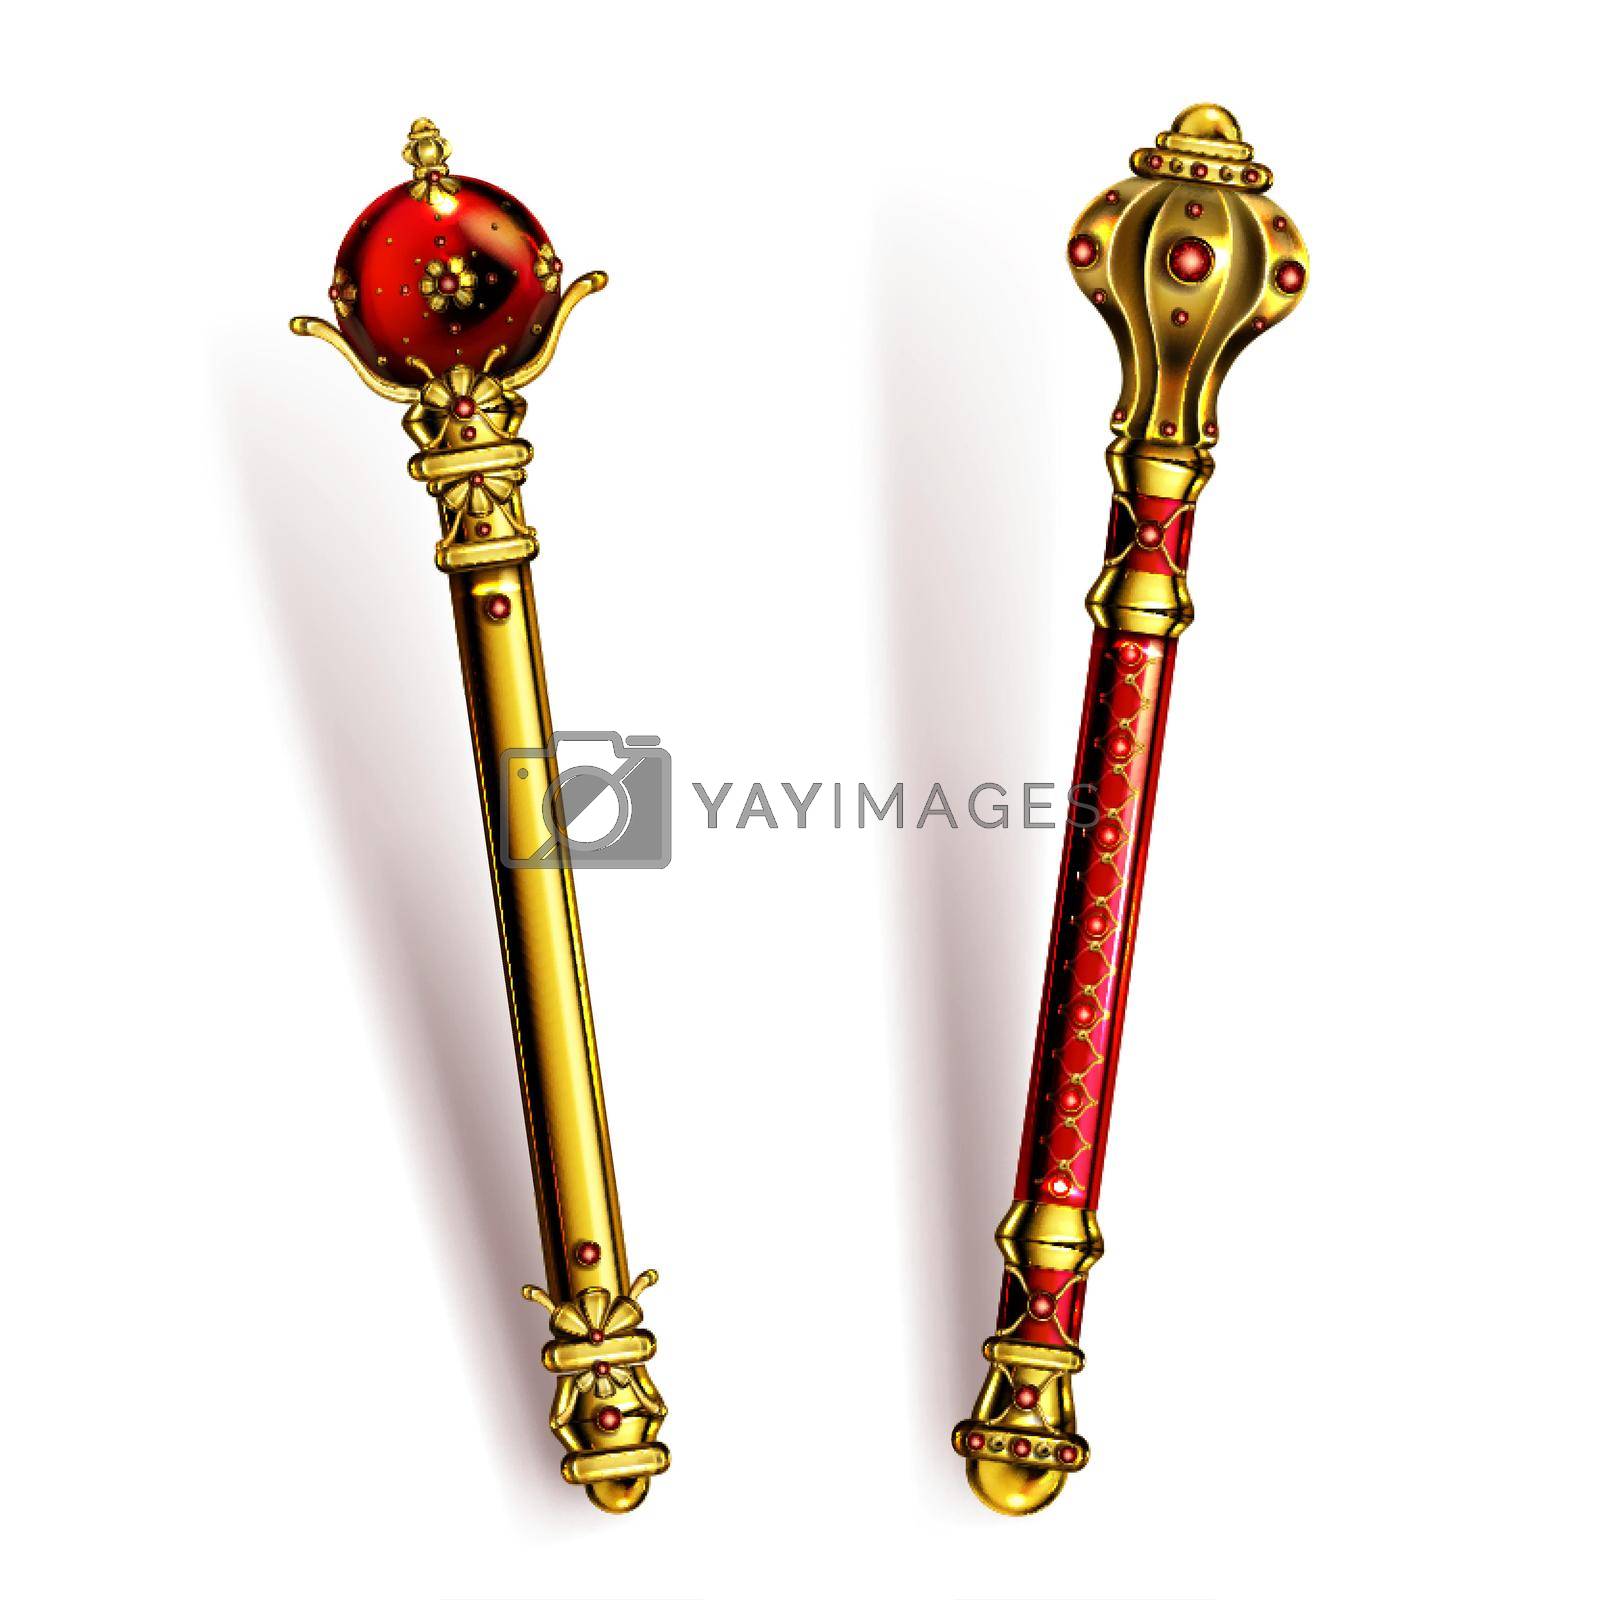 Royalty free image of Golden scepter for king or queen, royal wand. by vectorart